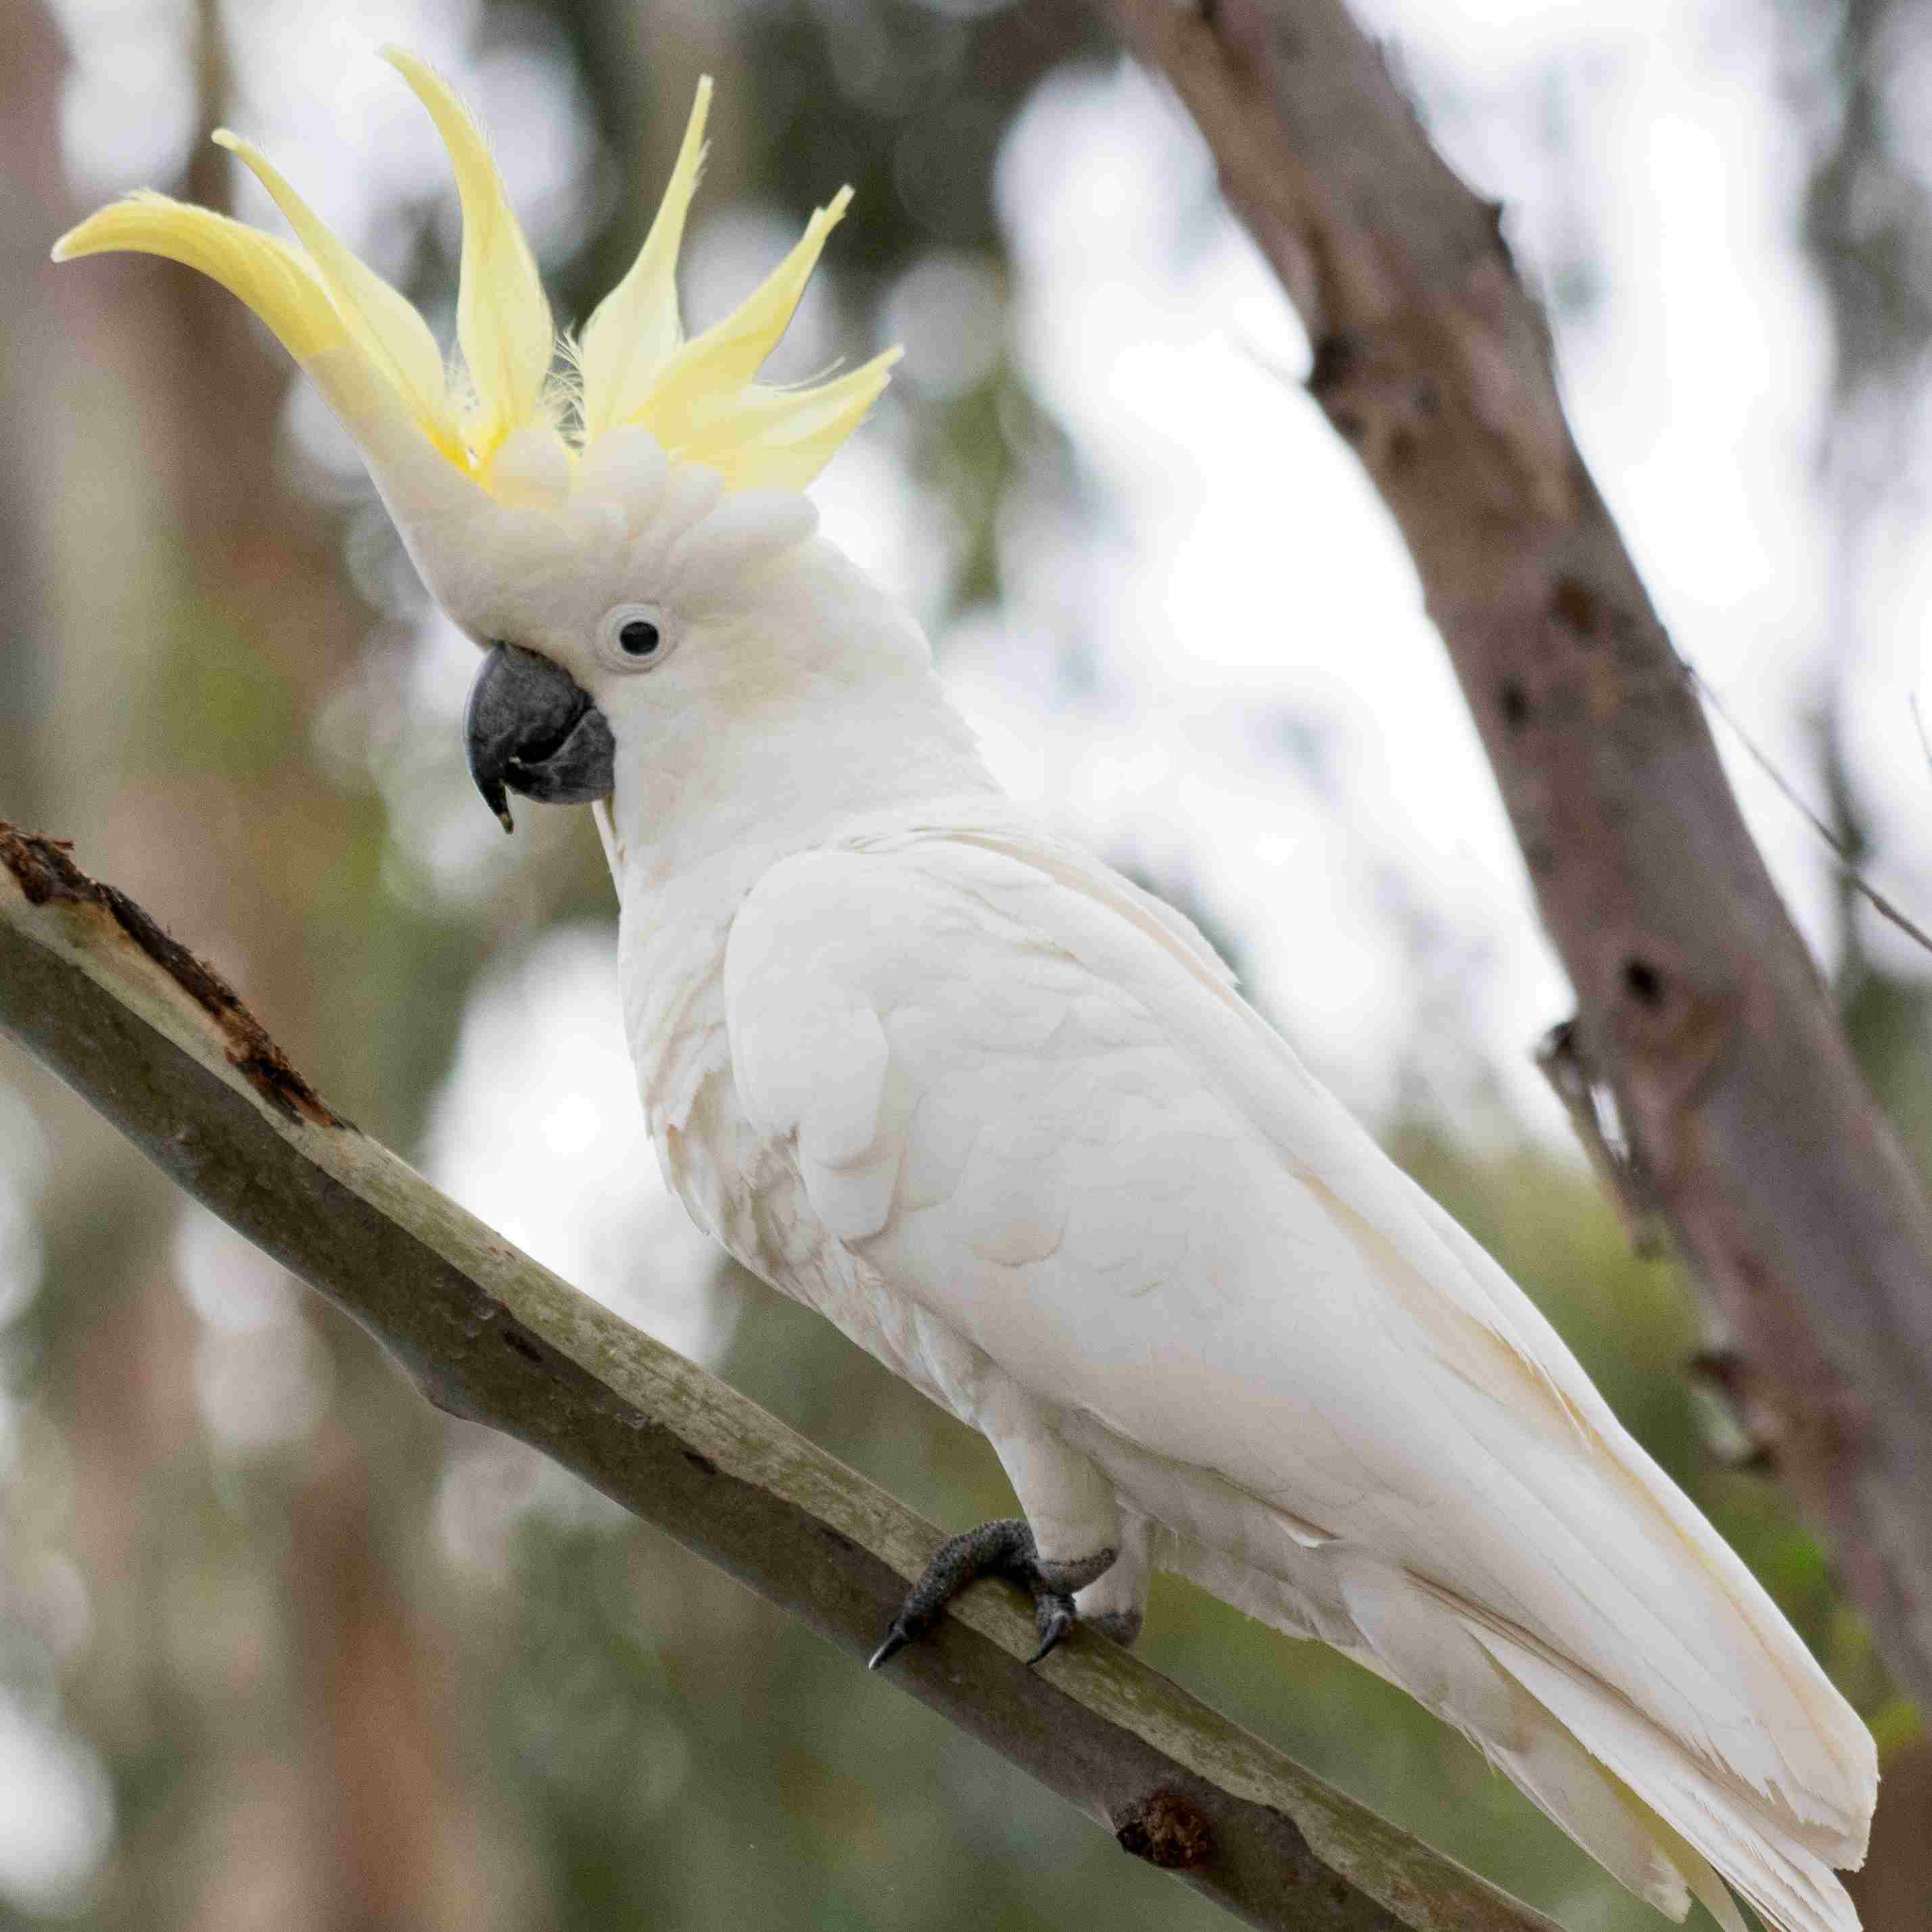 sulphur-crested cockatoo in a tree